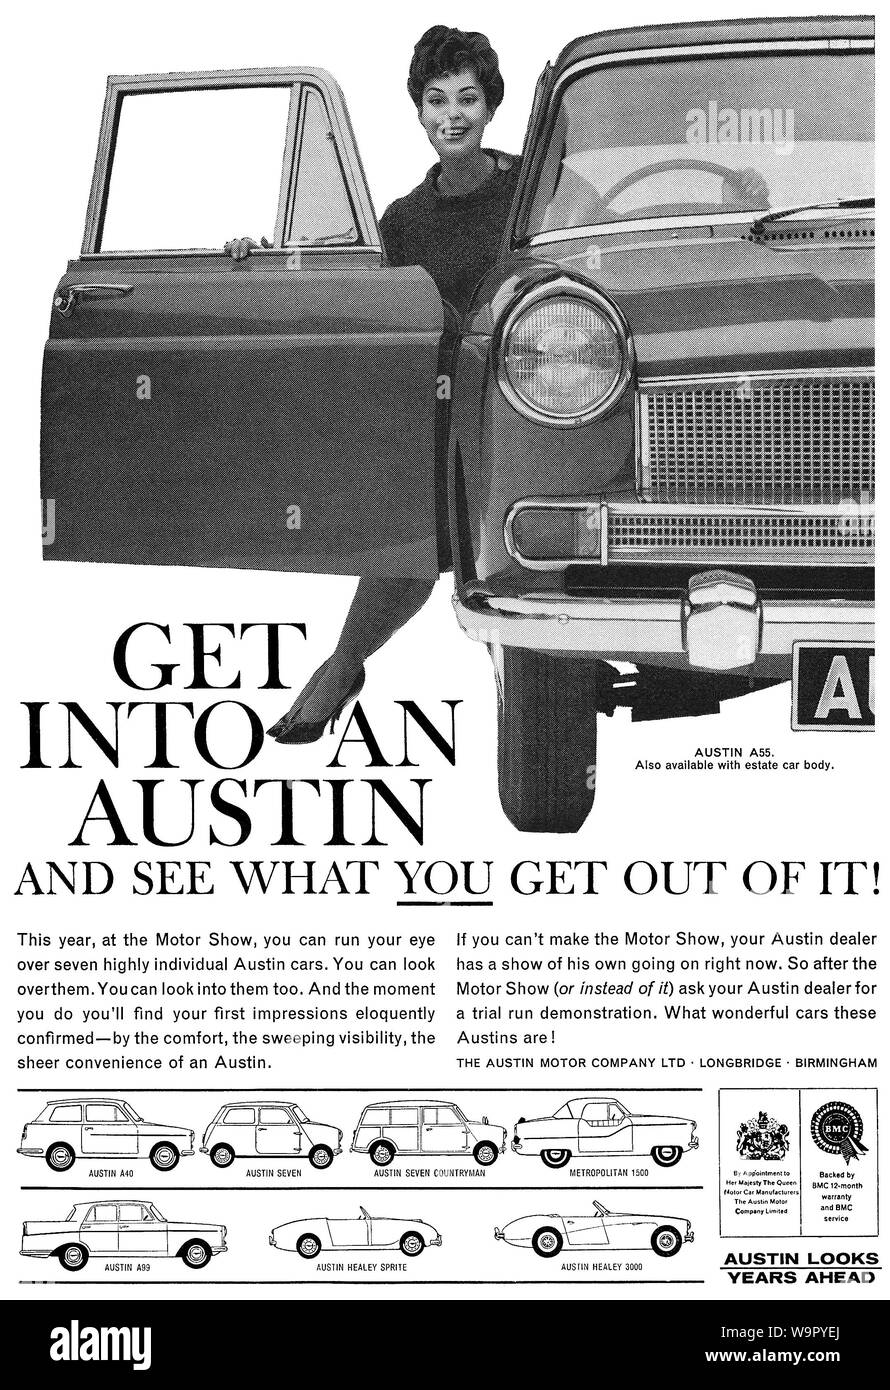 1960 British advertisement for Austin motor cars, featuring the Austin A55. Stock Photo